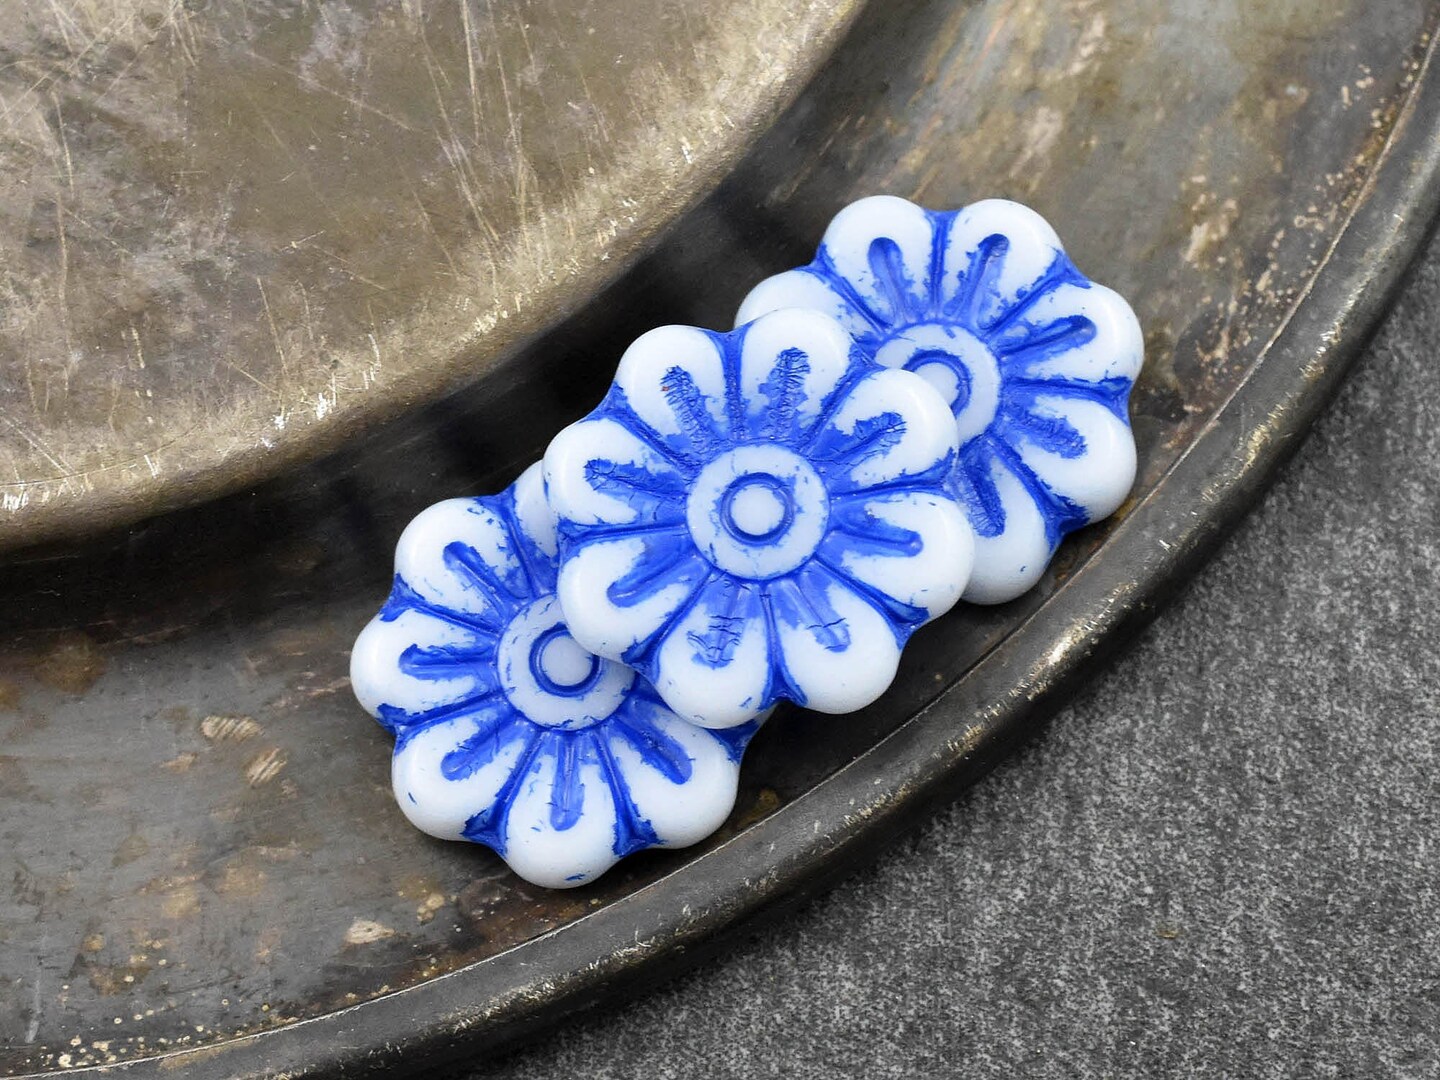 *6* 18mm Blue Washed Opaque White Daisy Flower Beads